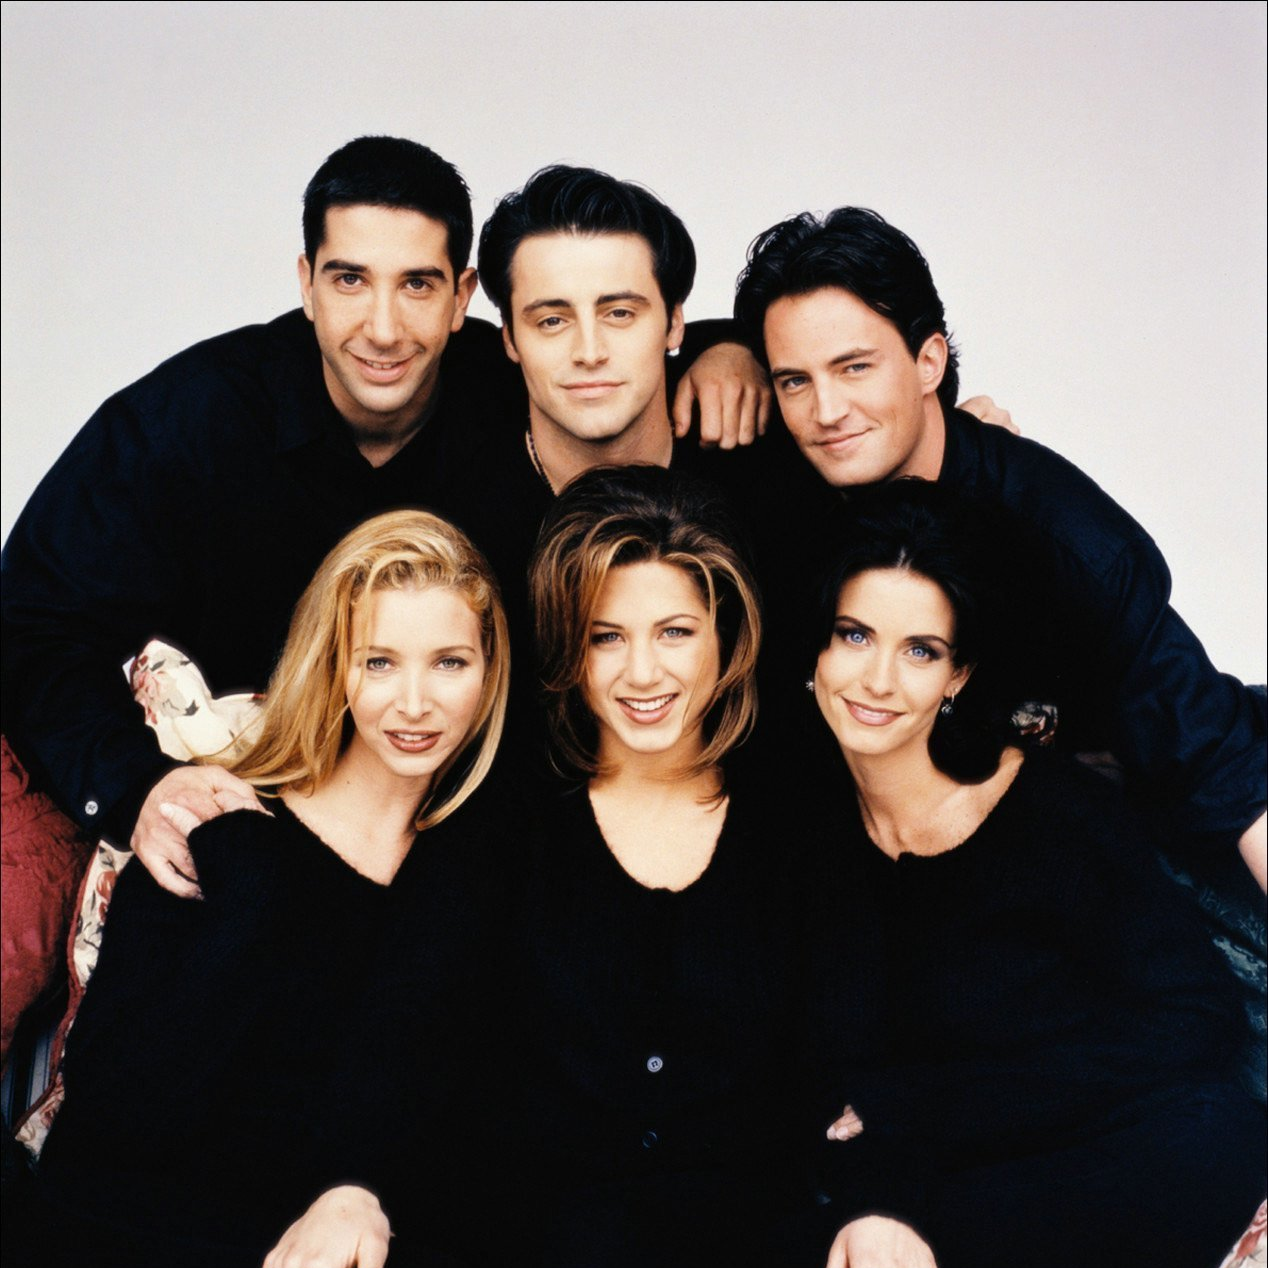 S10E16: The One With Rachel's Going Away Party (a.k.a. The One Where Rachel Goes To Paris)